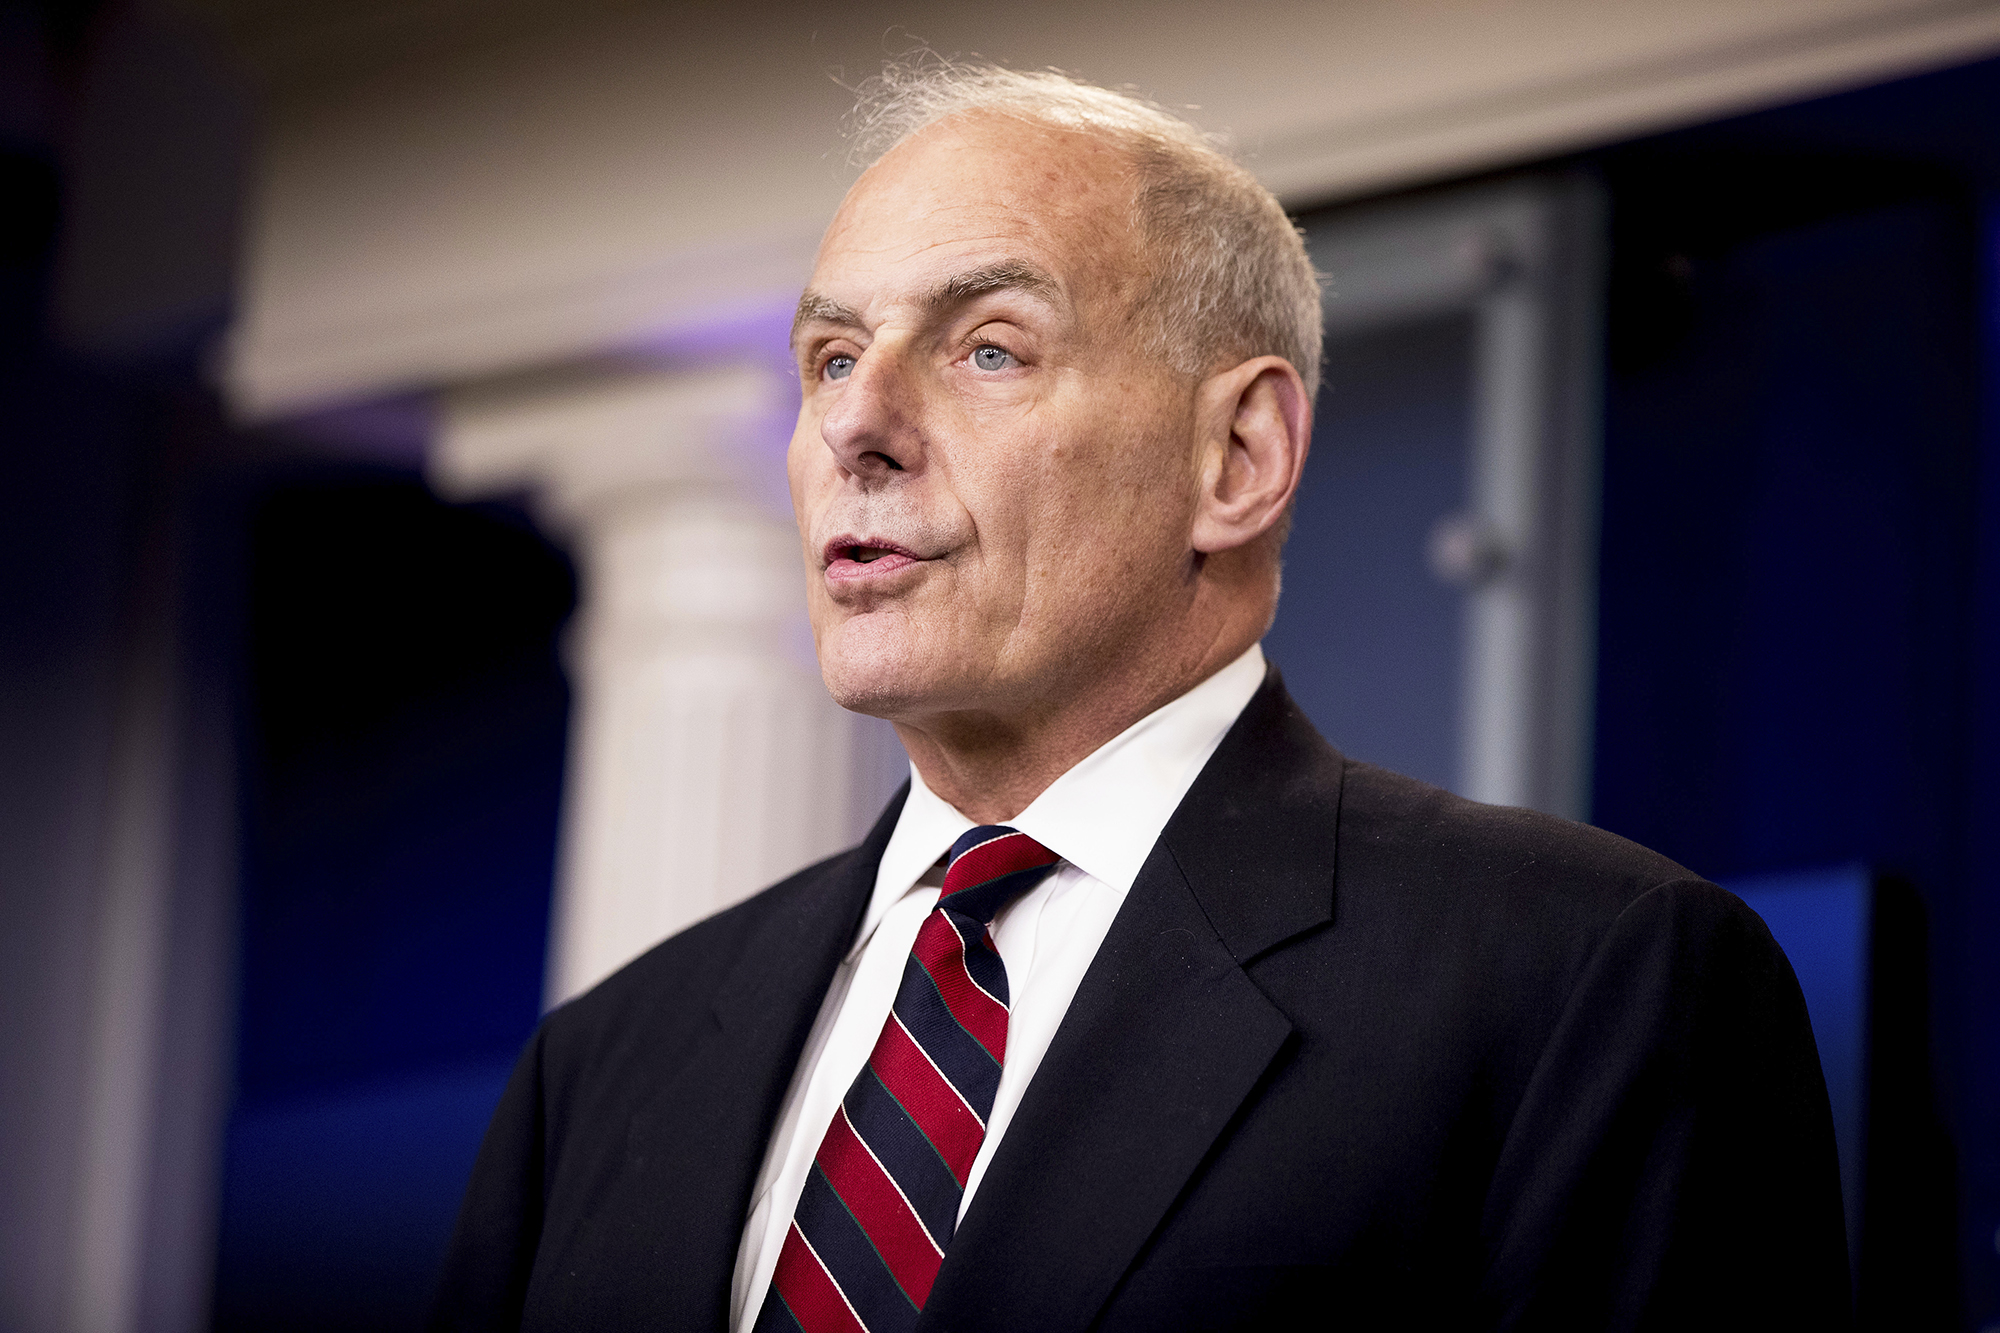 Homeland Security Secretary John Kelly talks to the media during the daily press briefing at the White House in Washington, D.C., on May 2, 2017. (Andrew Harnik—AP)